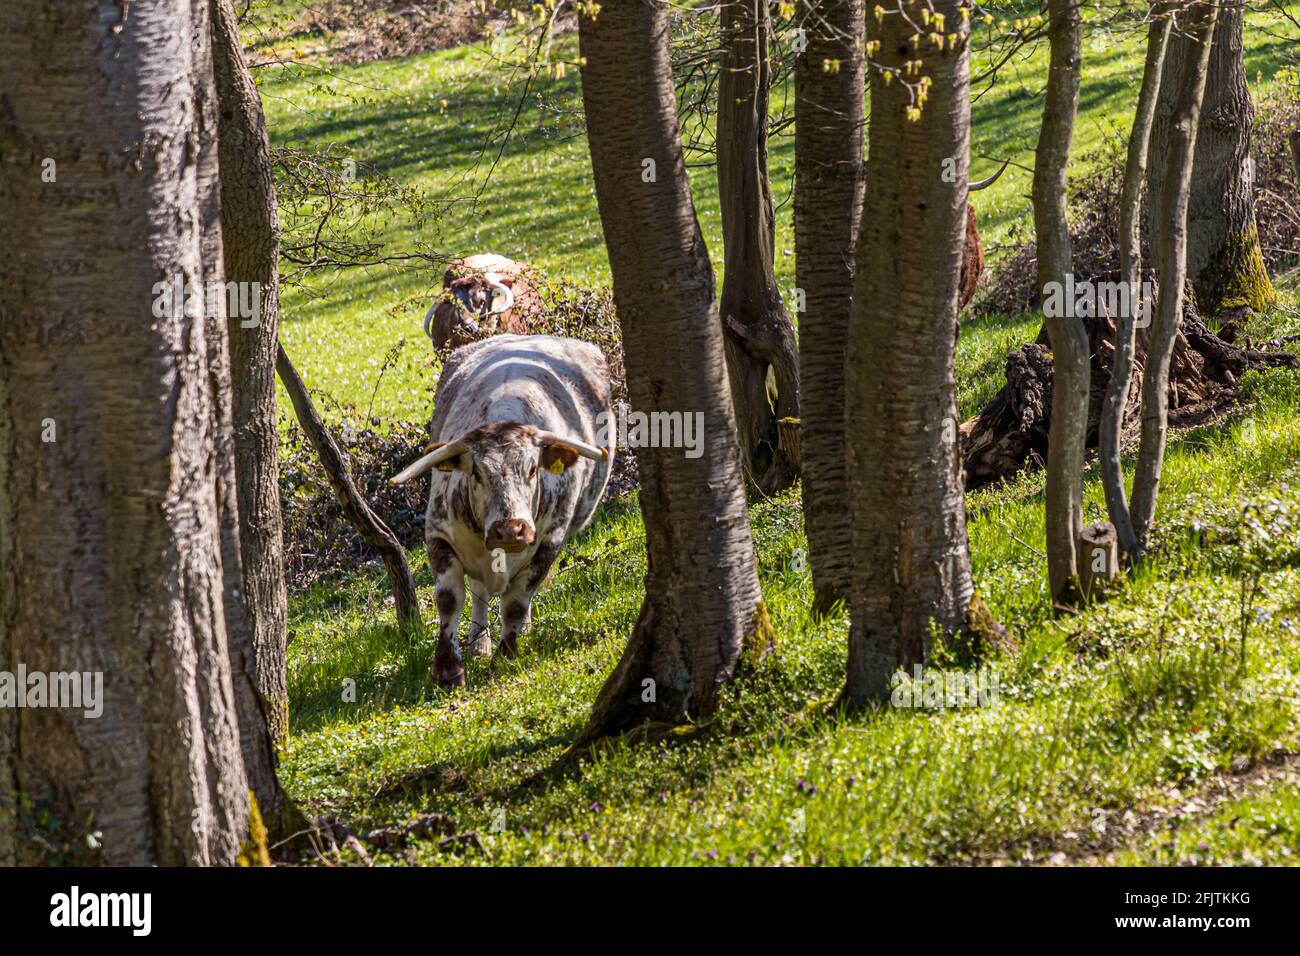 English Longhorn cattle is formerly known as Lancashire cattle in Nideggen, Germany Stock Photo